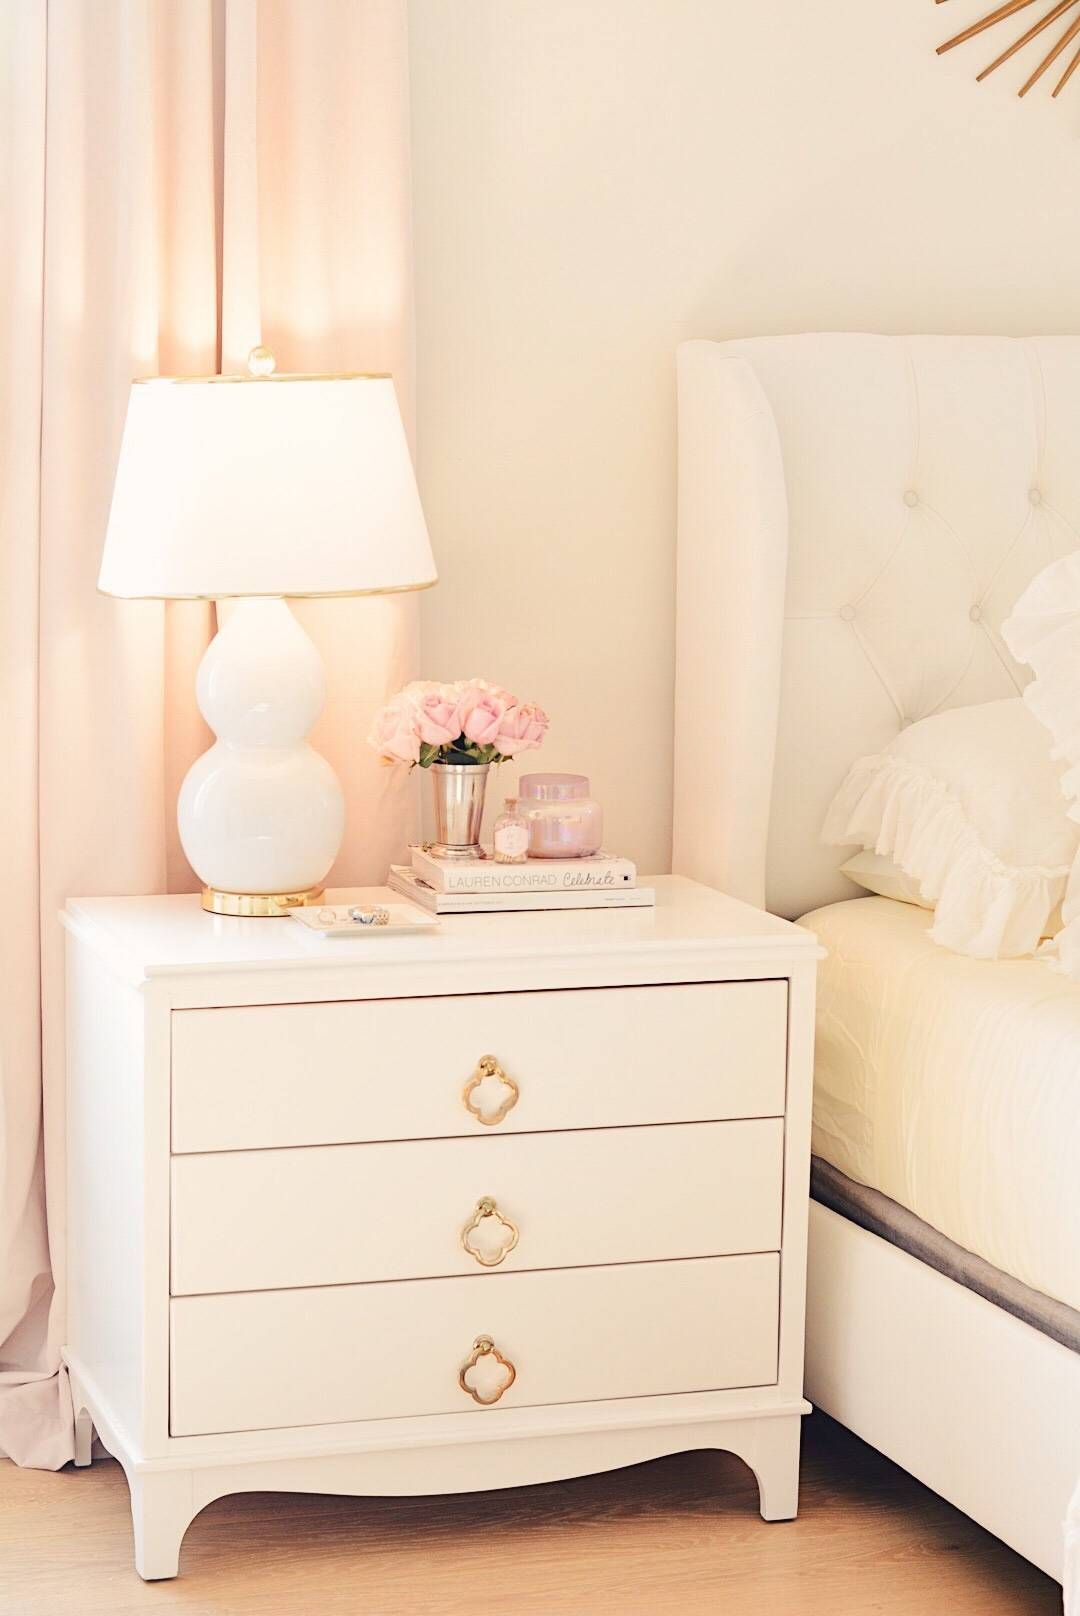 An Elegant Bedside Table for A Romantic Bedroom Makeover